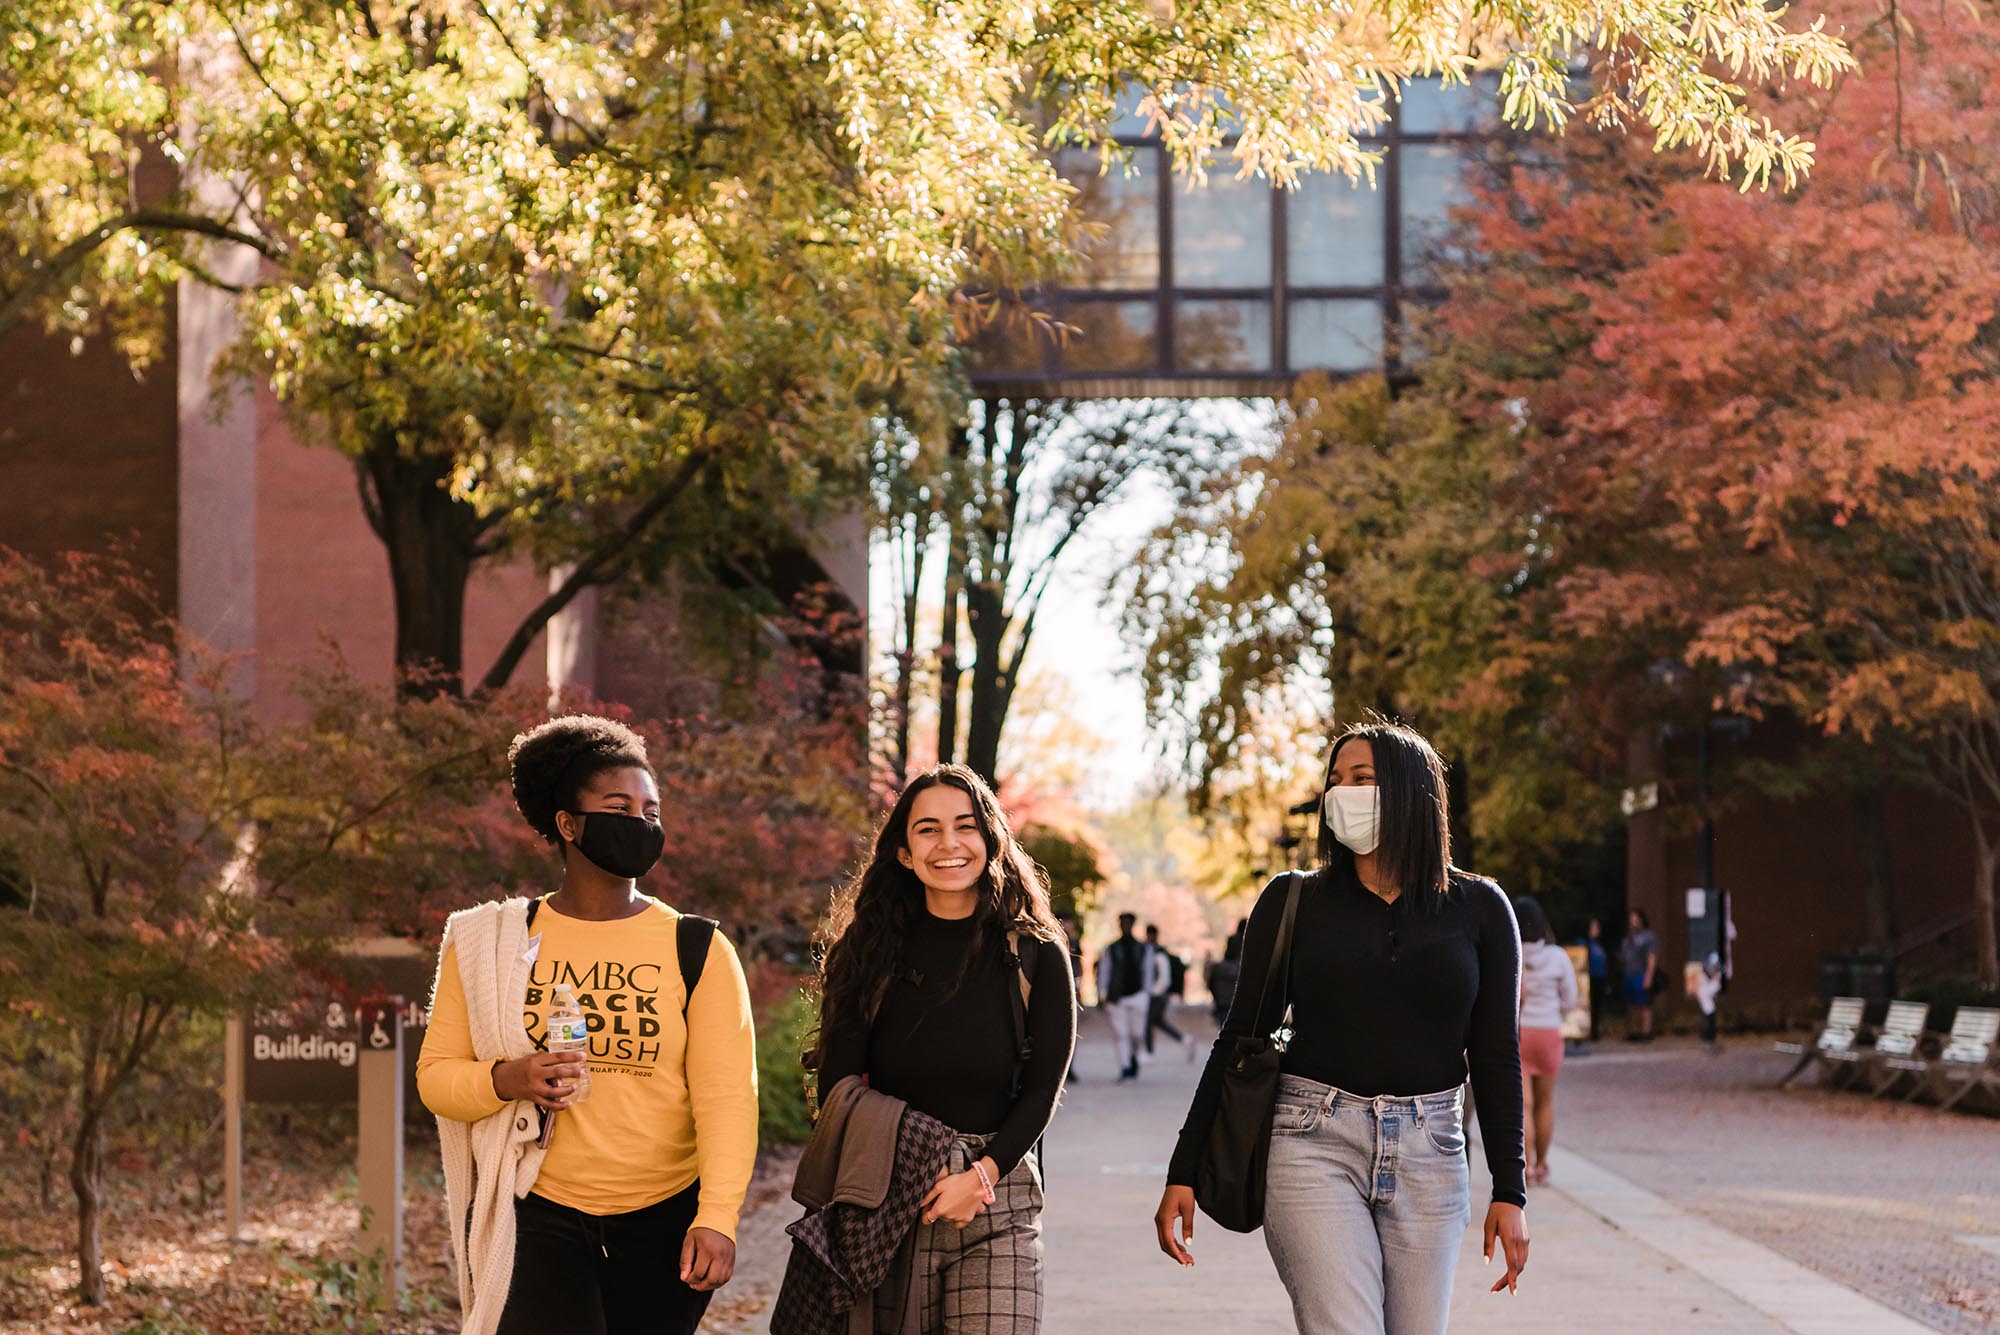 Three young women walk along UMBC's academic row, having a joyous conversation. Two are wearing masks, one has a shirt that reads "UMBC Black and Gold Rush."